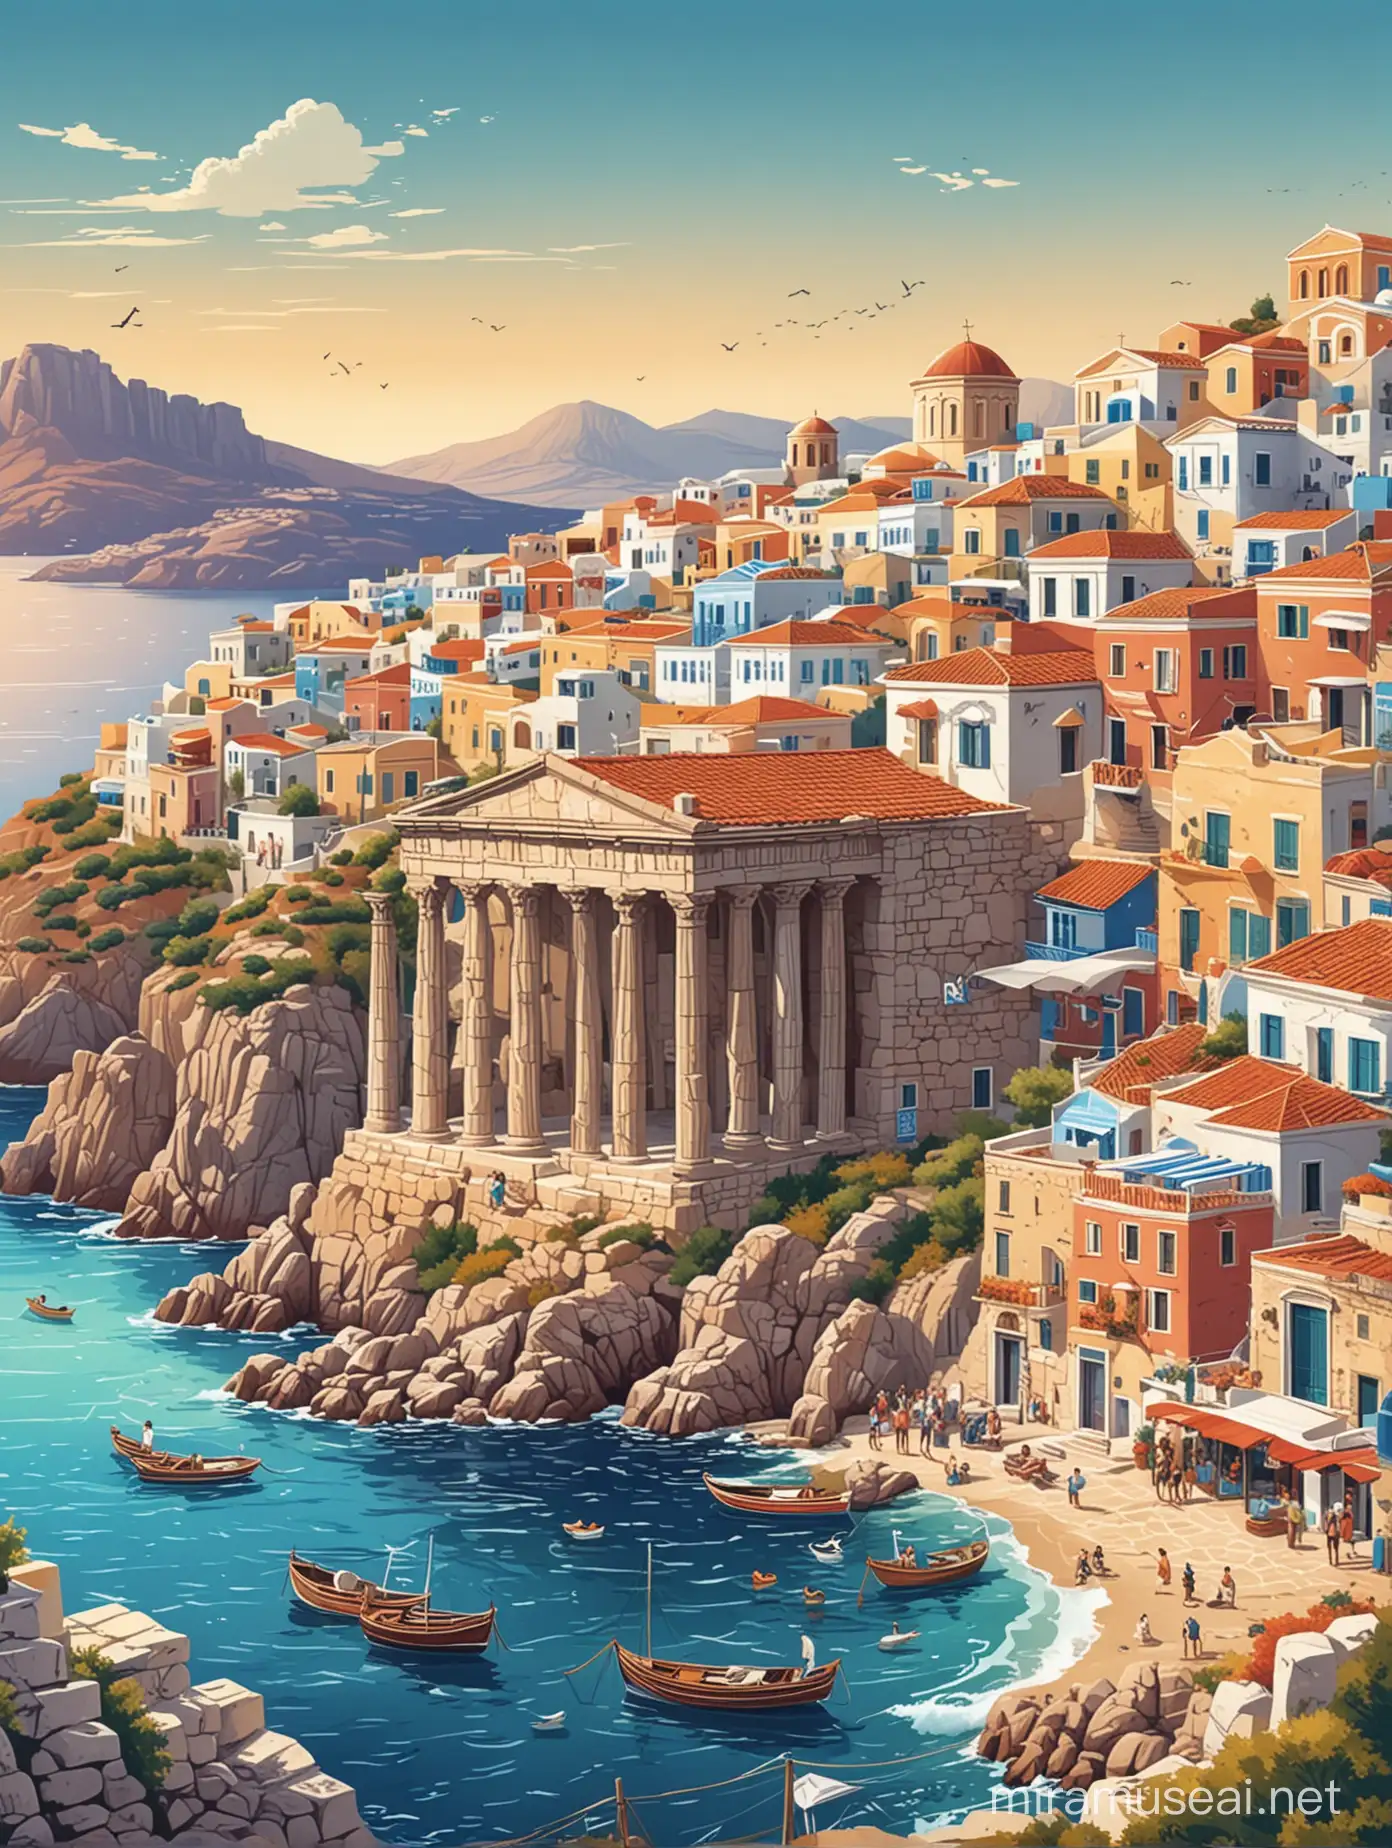 Create a illustrator colorful picture that represents Greece

